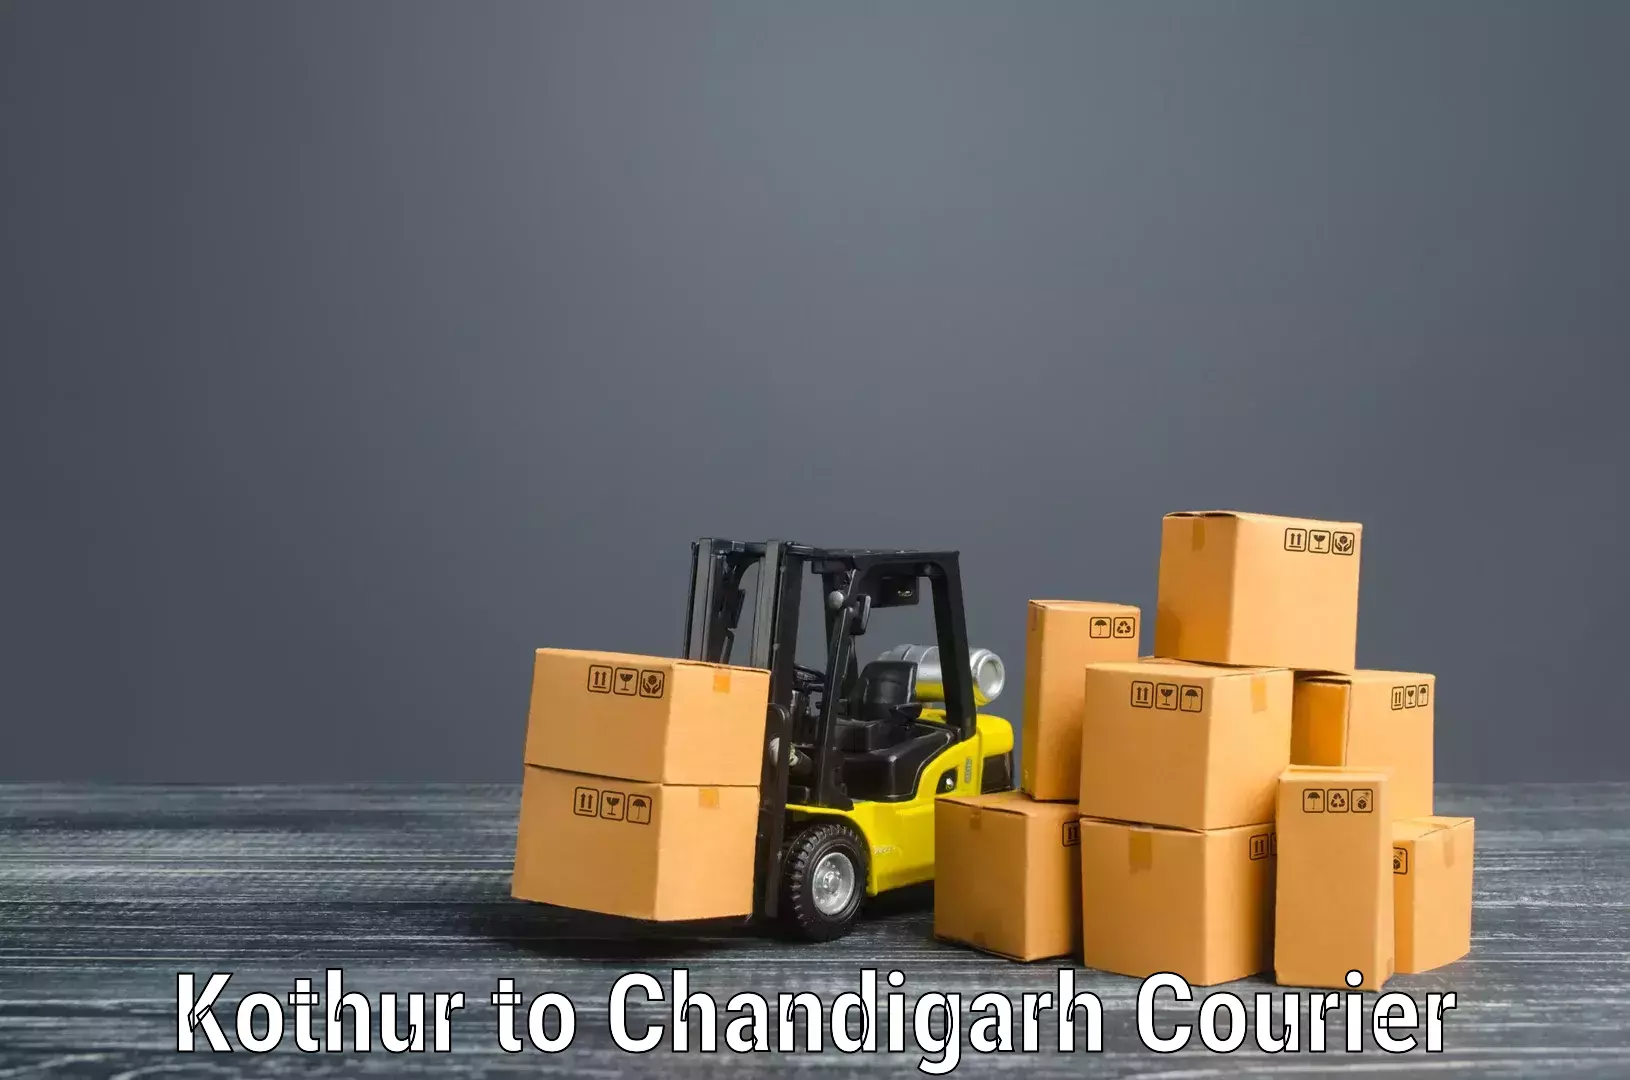 Hassle-free relocation in Kothur to Chandigarh